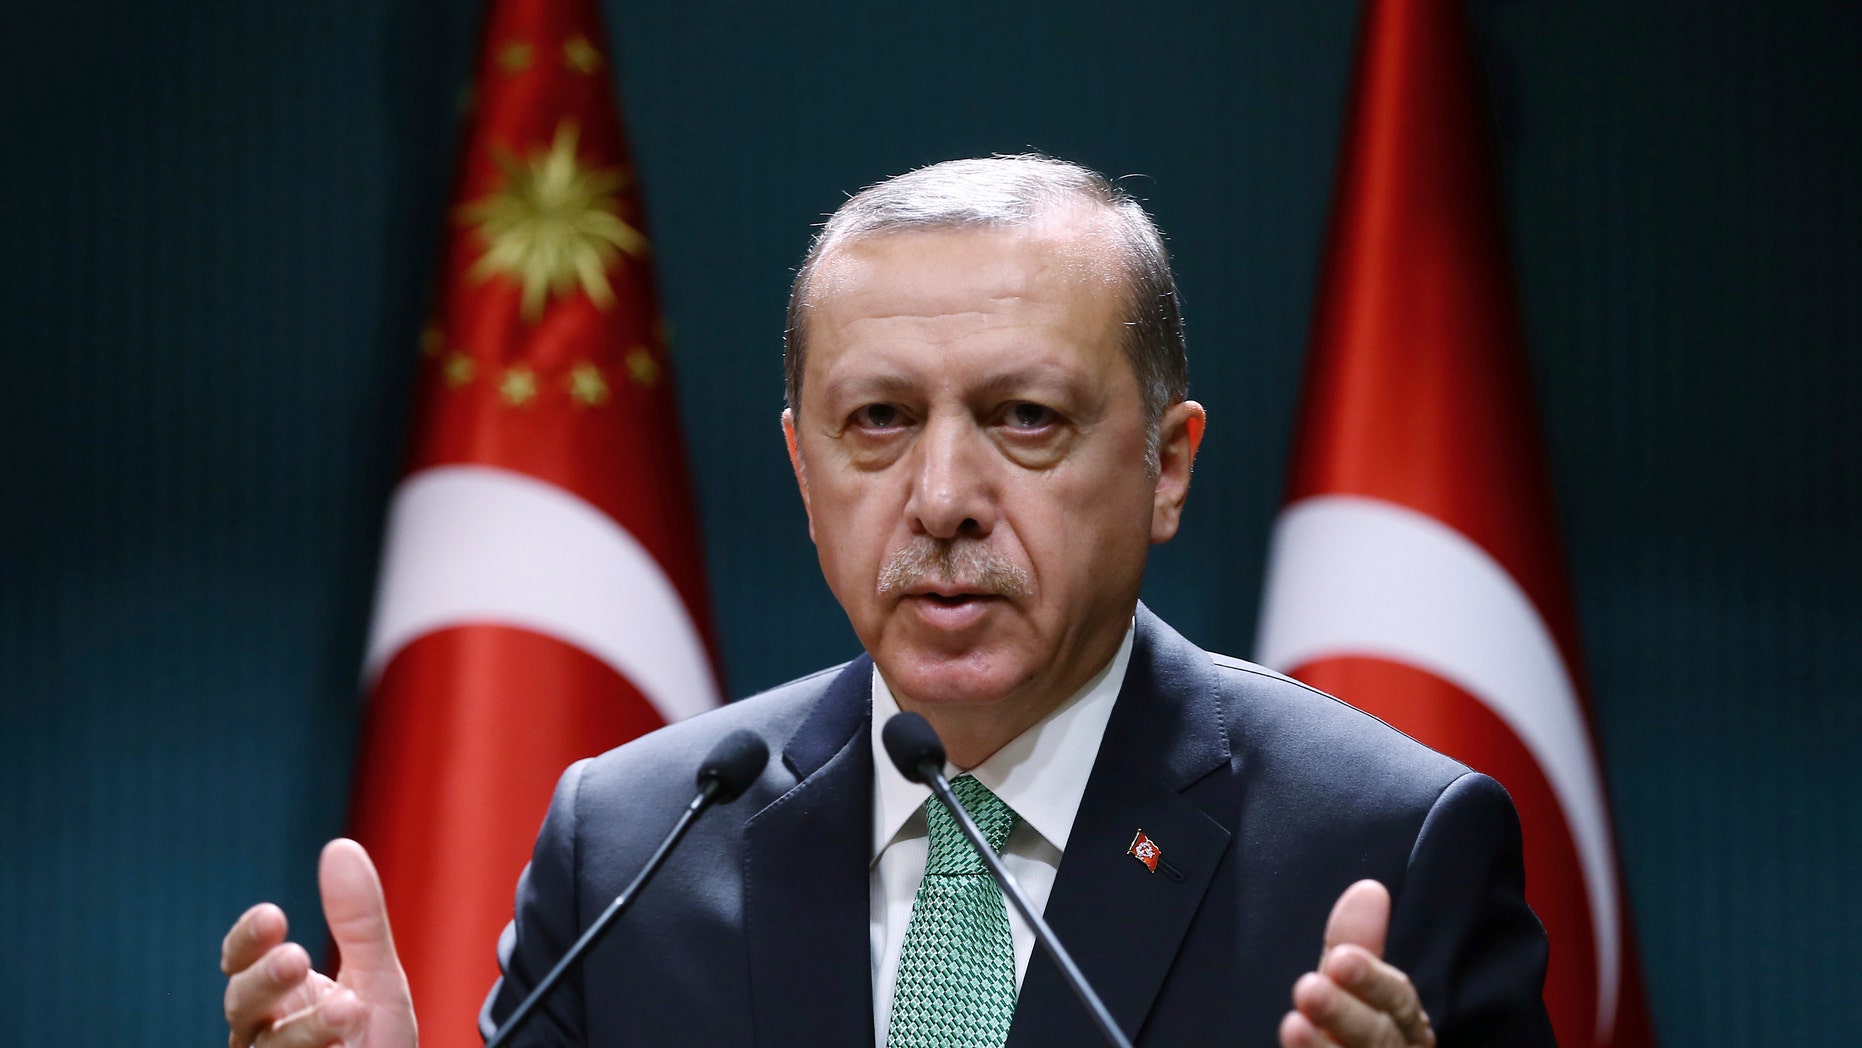 Turkish elections Sunday will create a problem for the world a reelected President Erdogan